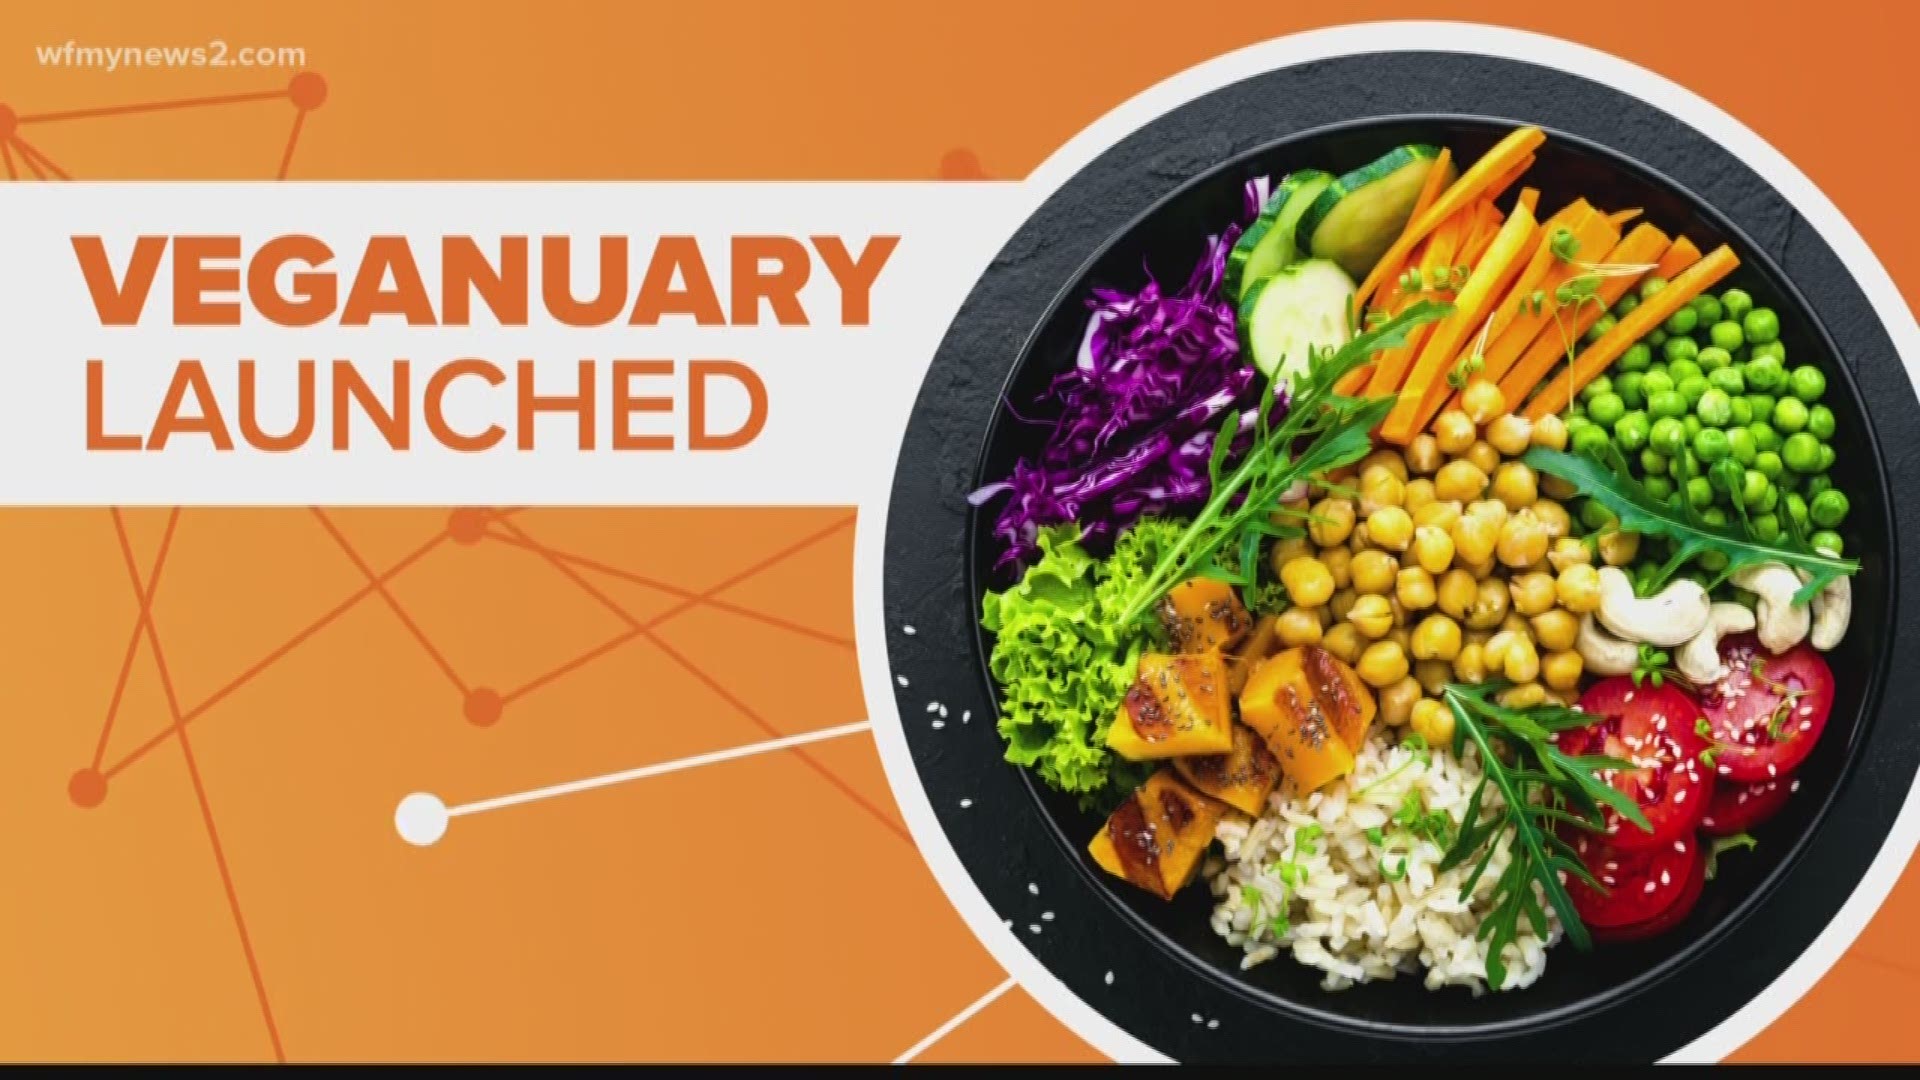 Veganuary is an entire month dedicated to going vegan. 2 Wants to Know if it’s healthy for your body to suddenly change to a meatless diet.